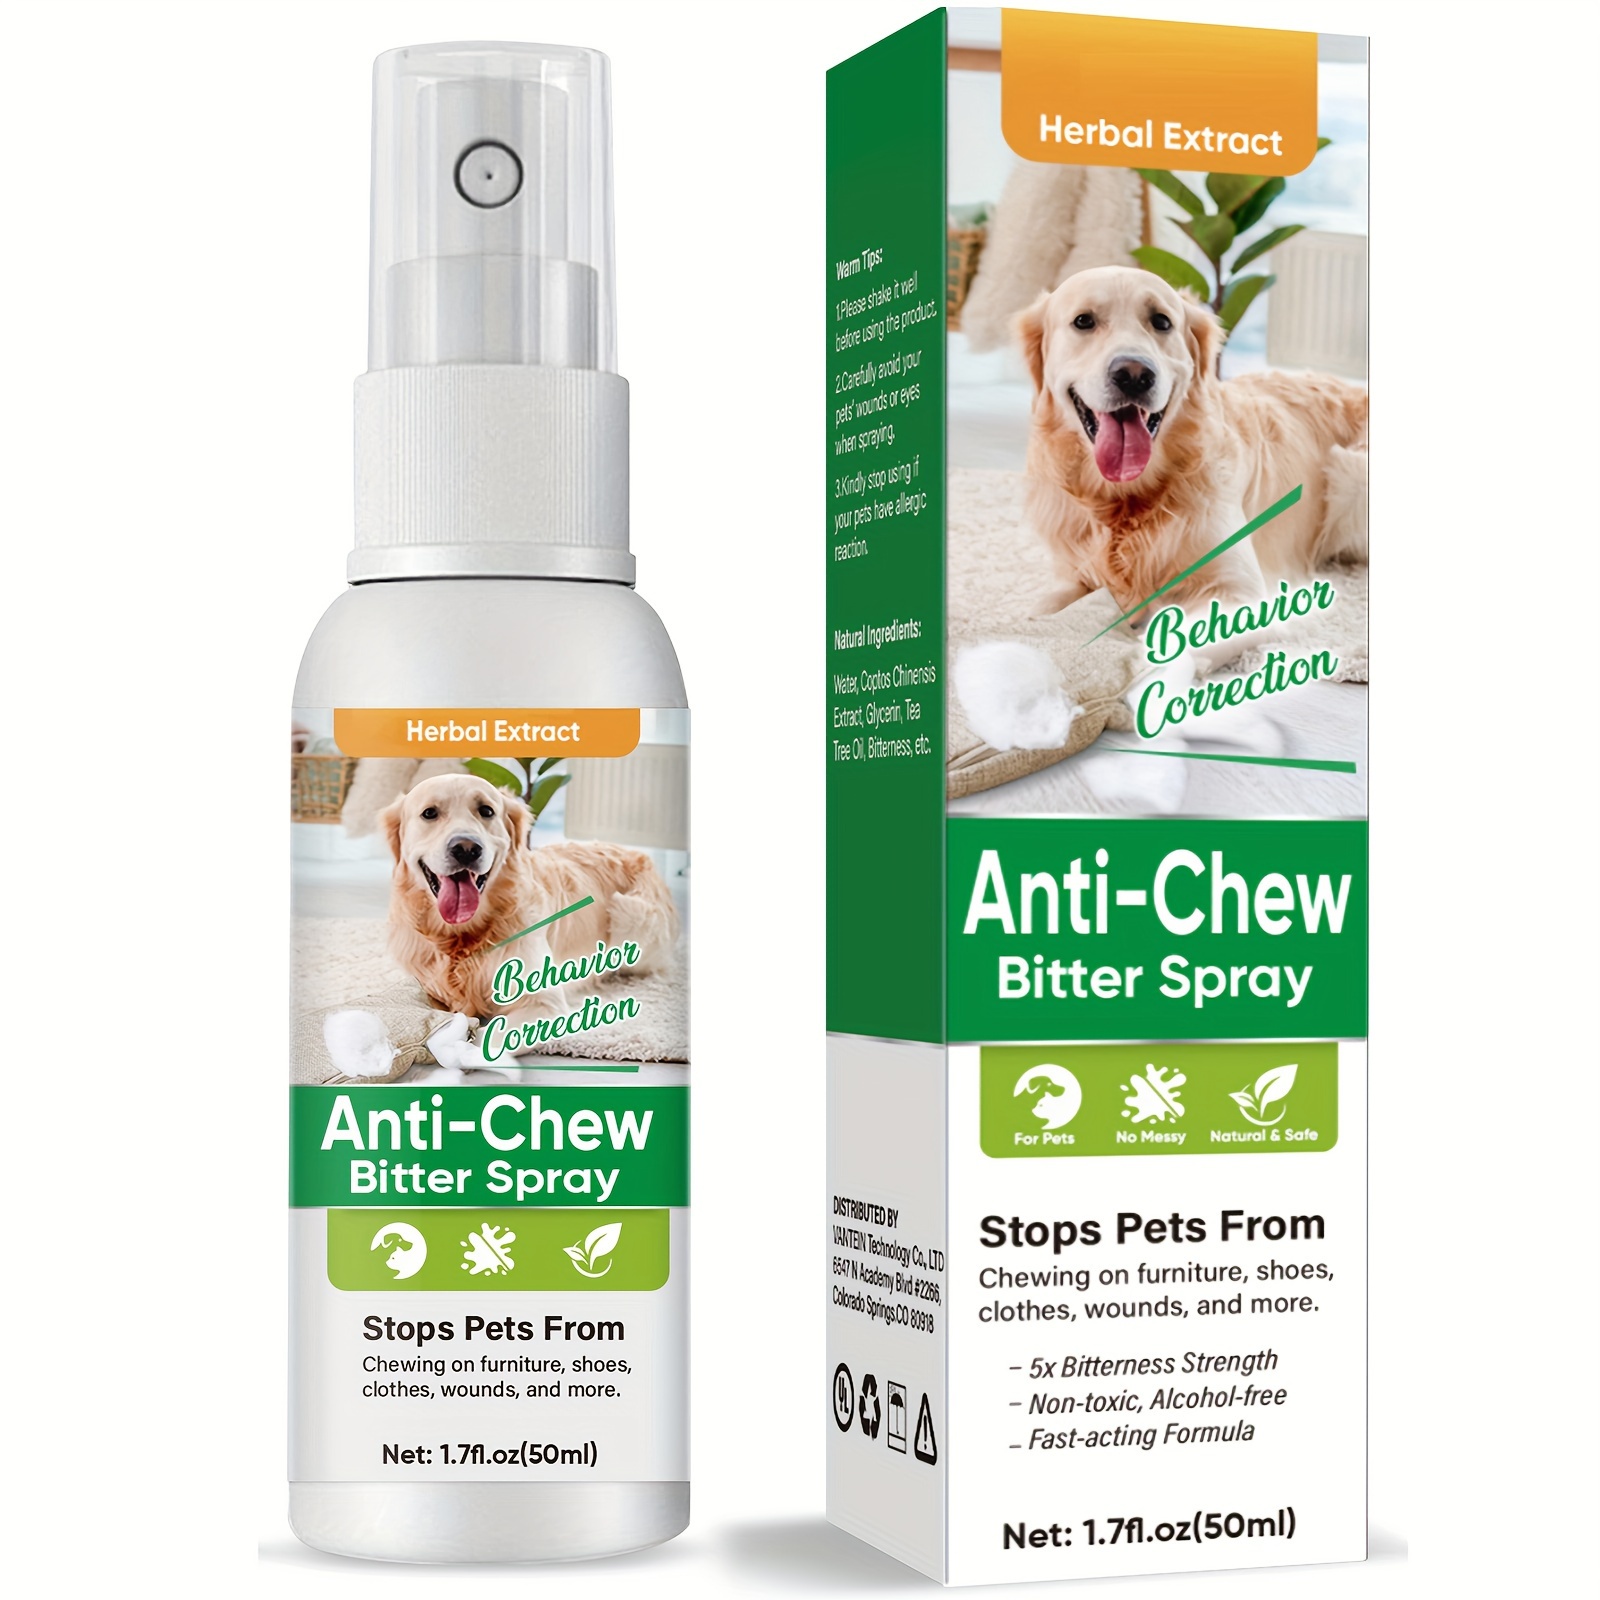 

Bitter Spray For Dogs To Stop Chewing, No Chew Spray For Dogs & Cats, Pet Corrector Spray For Indoor And Outdoor Use, Protect Your Furniture And Prevents Dogs From Biting